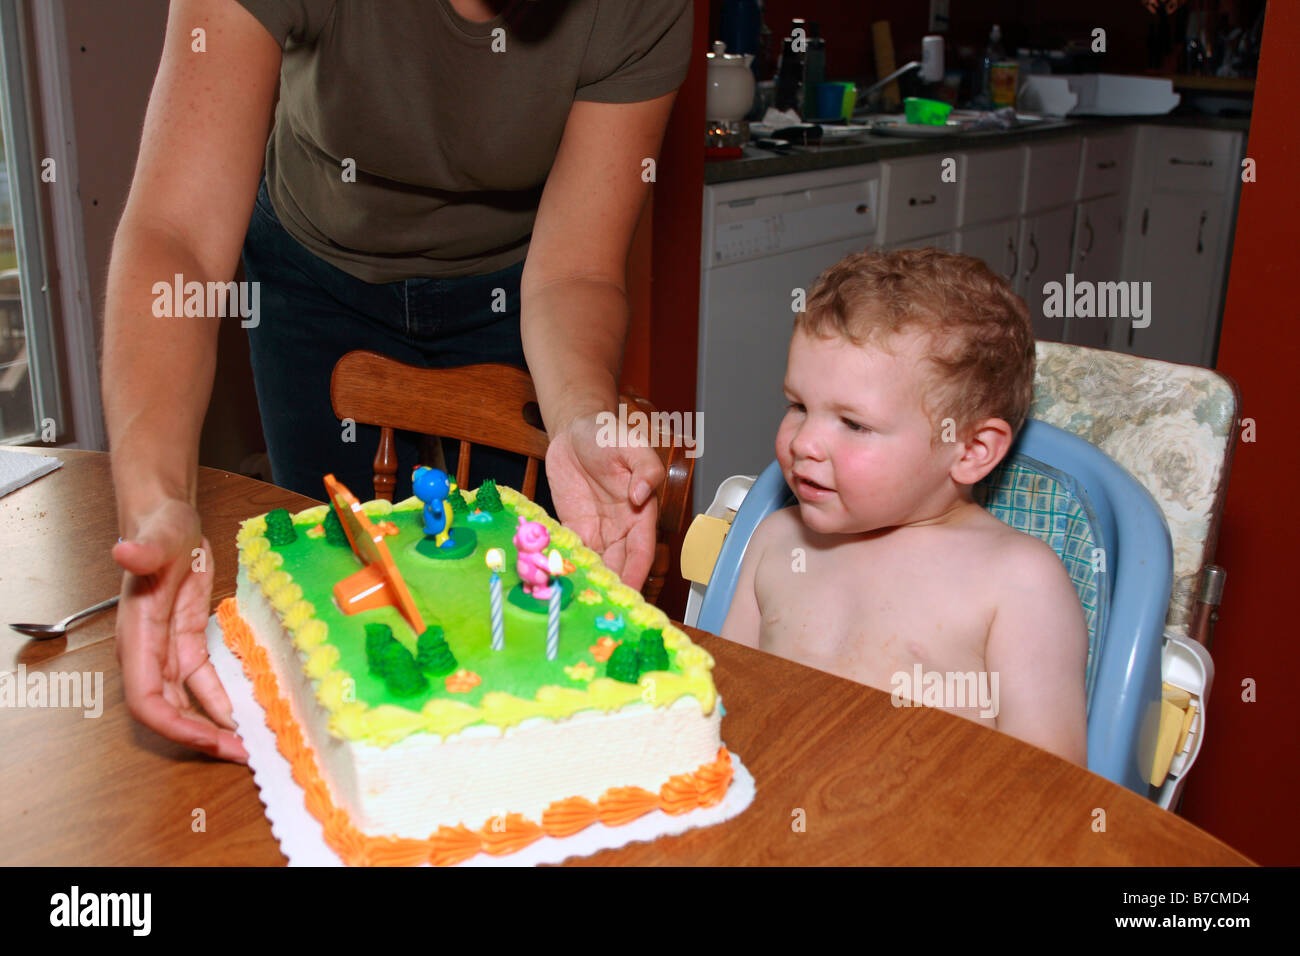 a 2 year old and his birthday cake Stock Photo